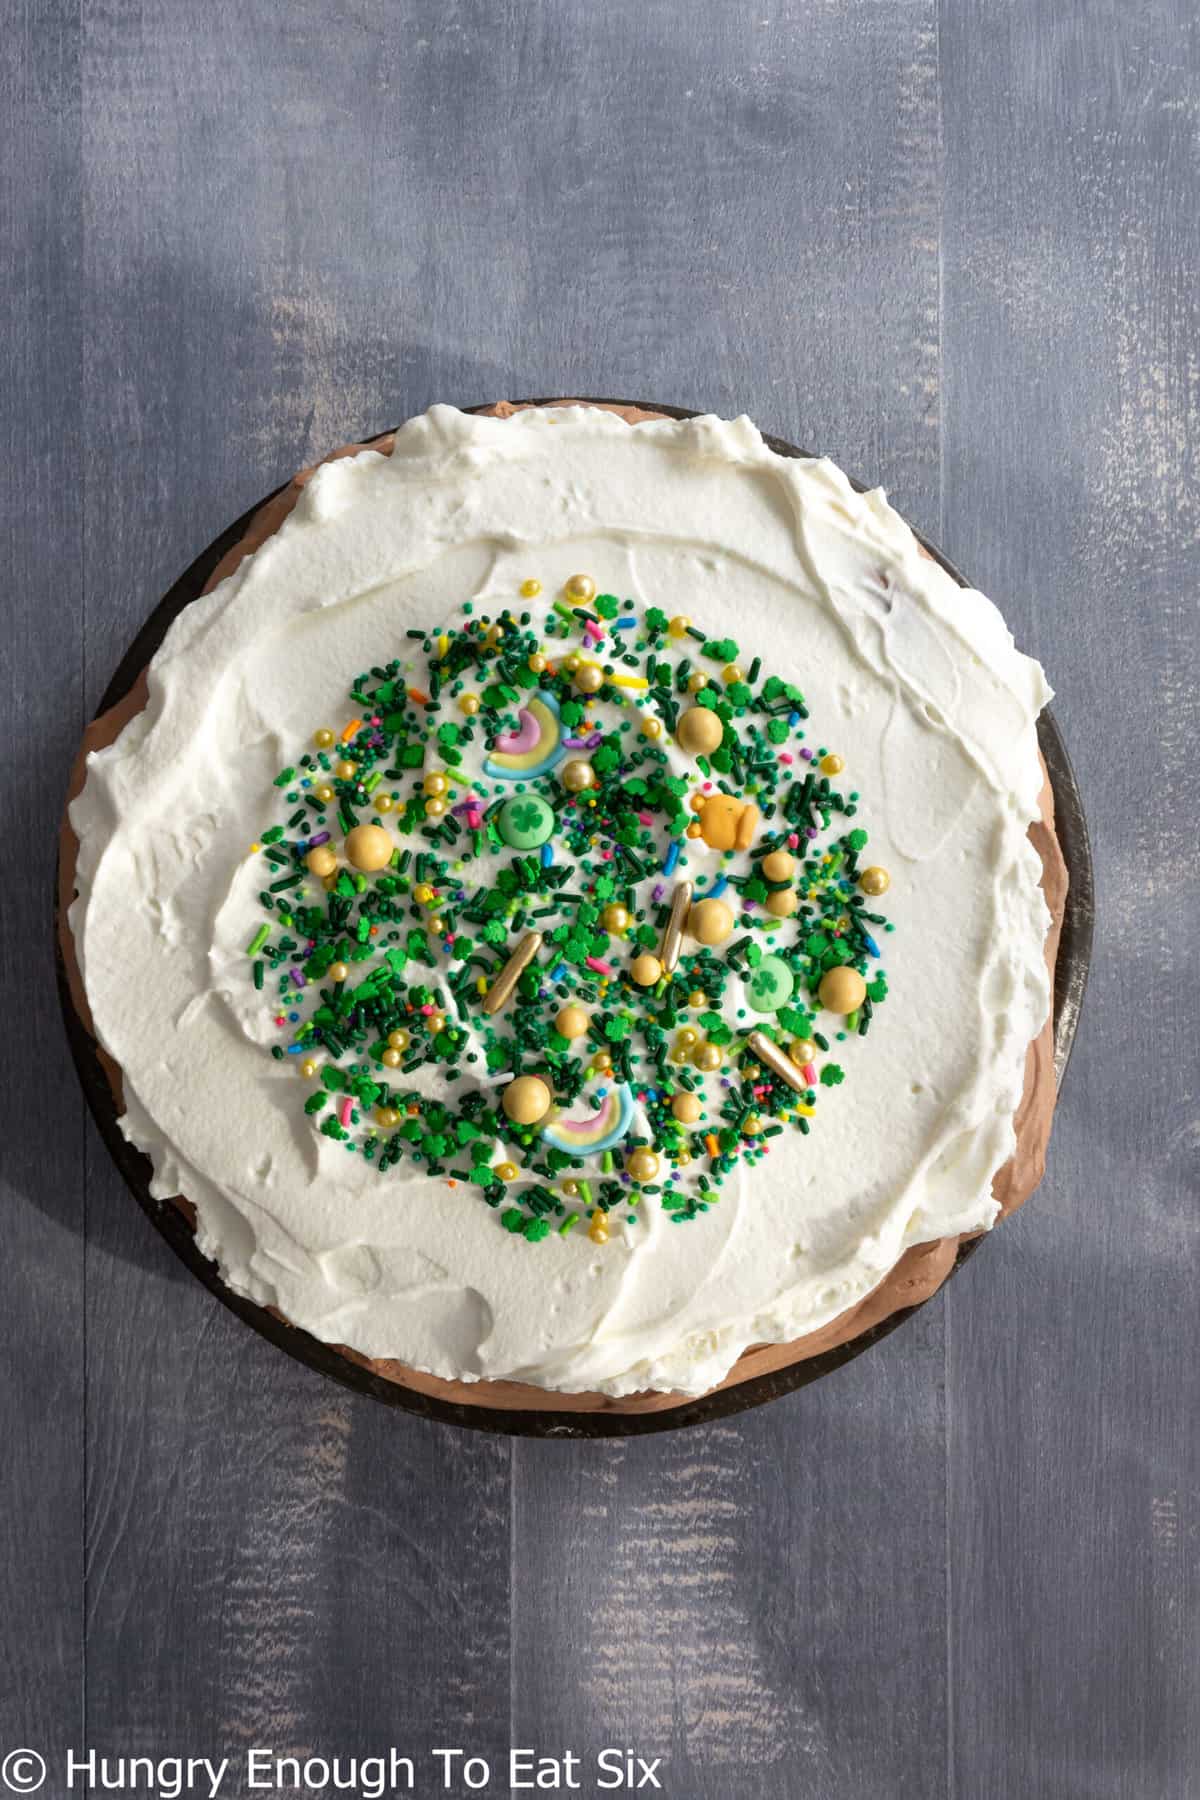 Round cream-topped pie with center of green and yellow sprinkles.